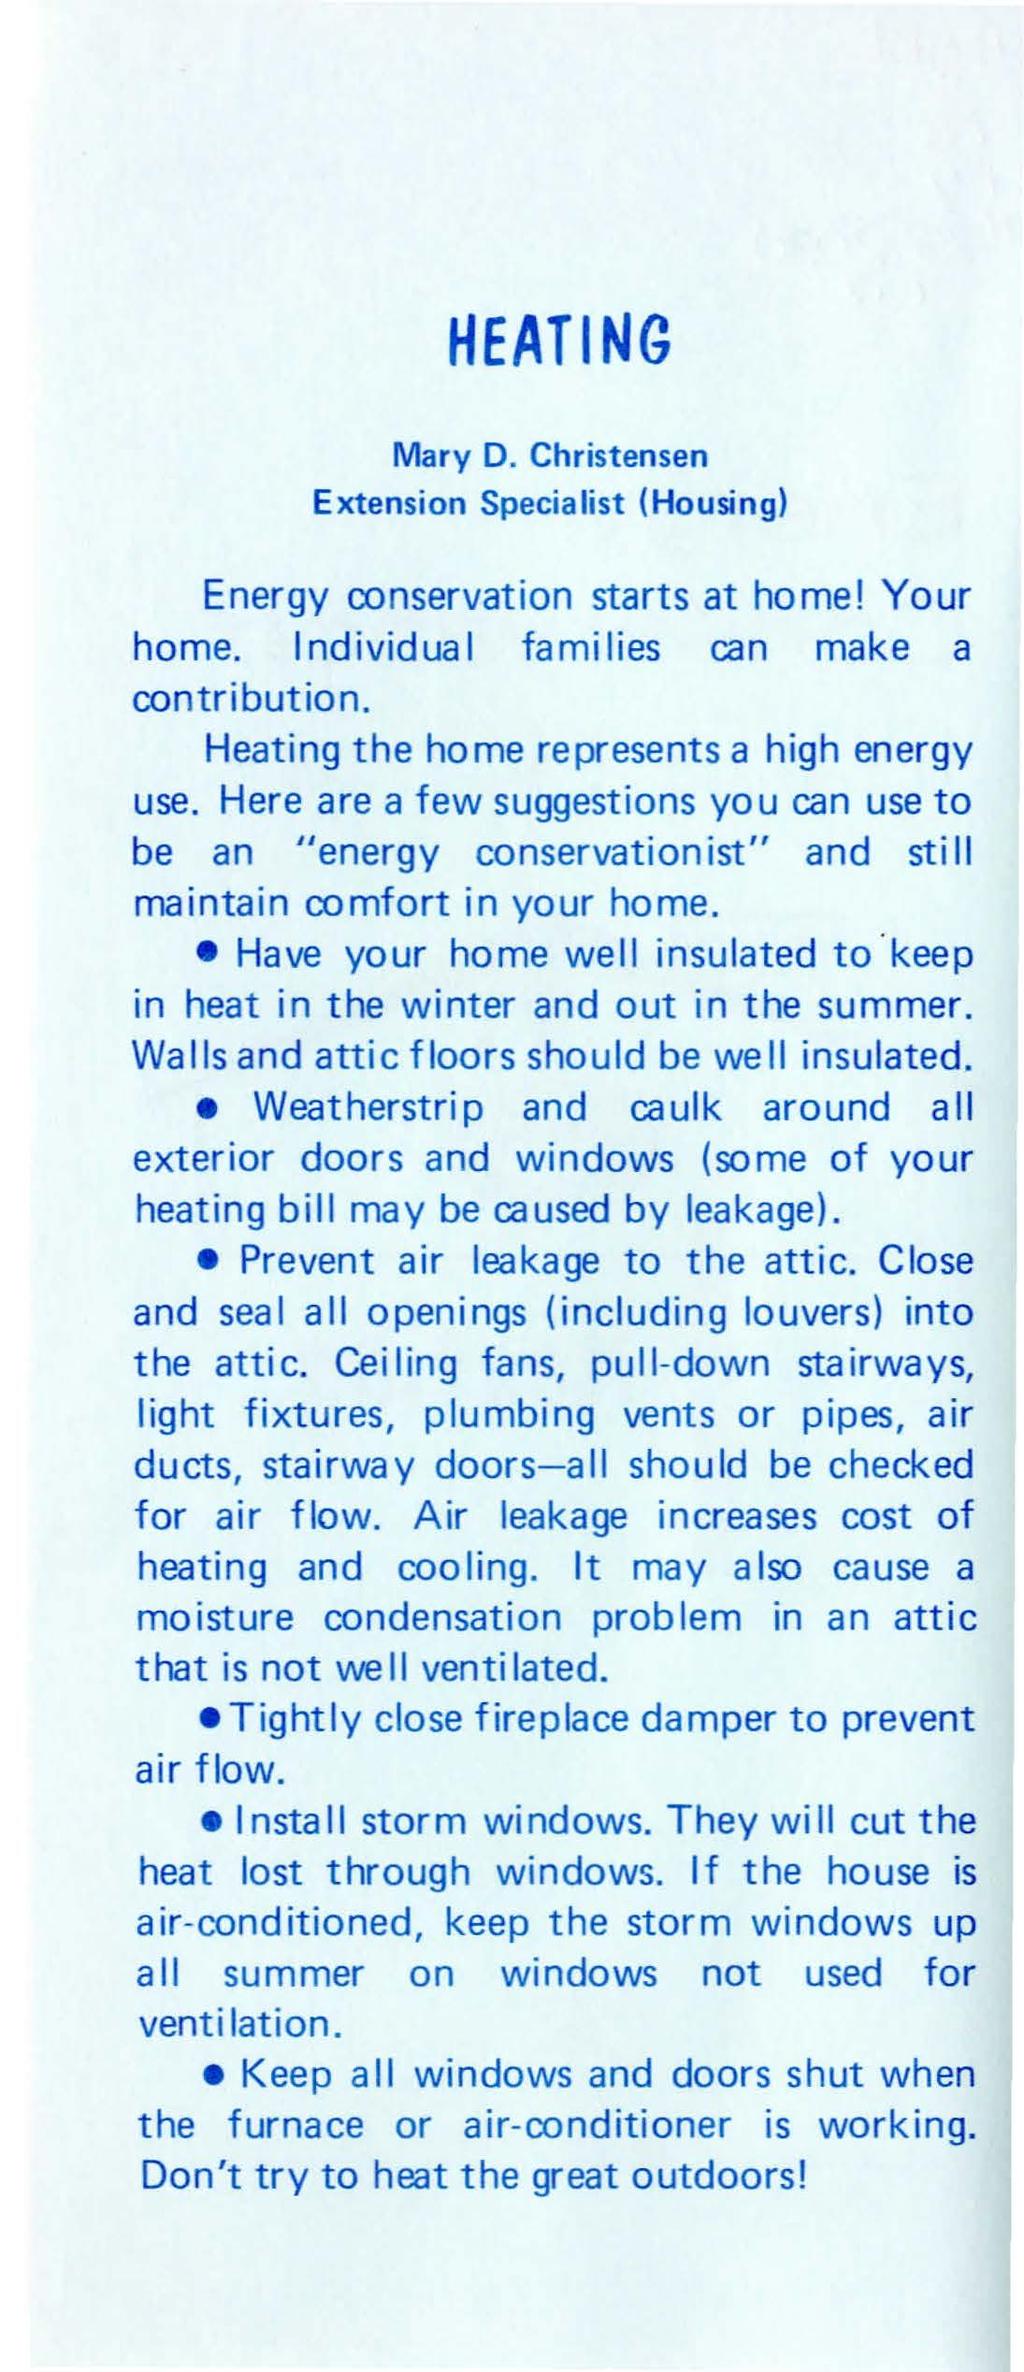 HEATING Mary D. Christensen Extension Specialist (Housing) Energy conservation starts at home! Your home. Individual families can make a contribution. Heating the home represents a high energ y use.